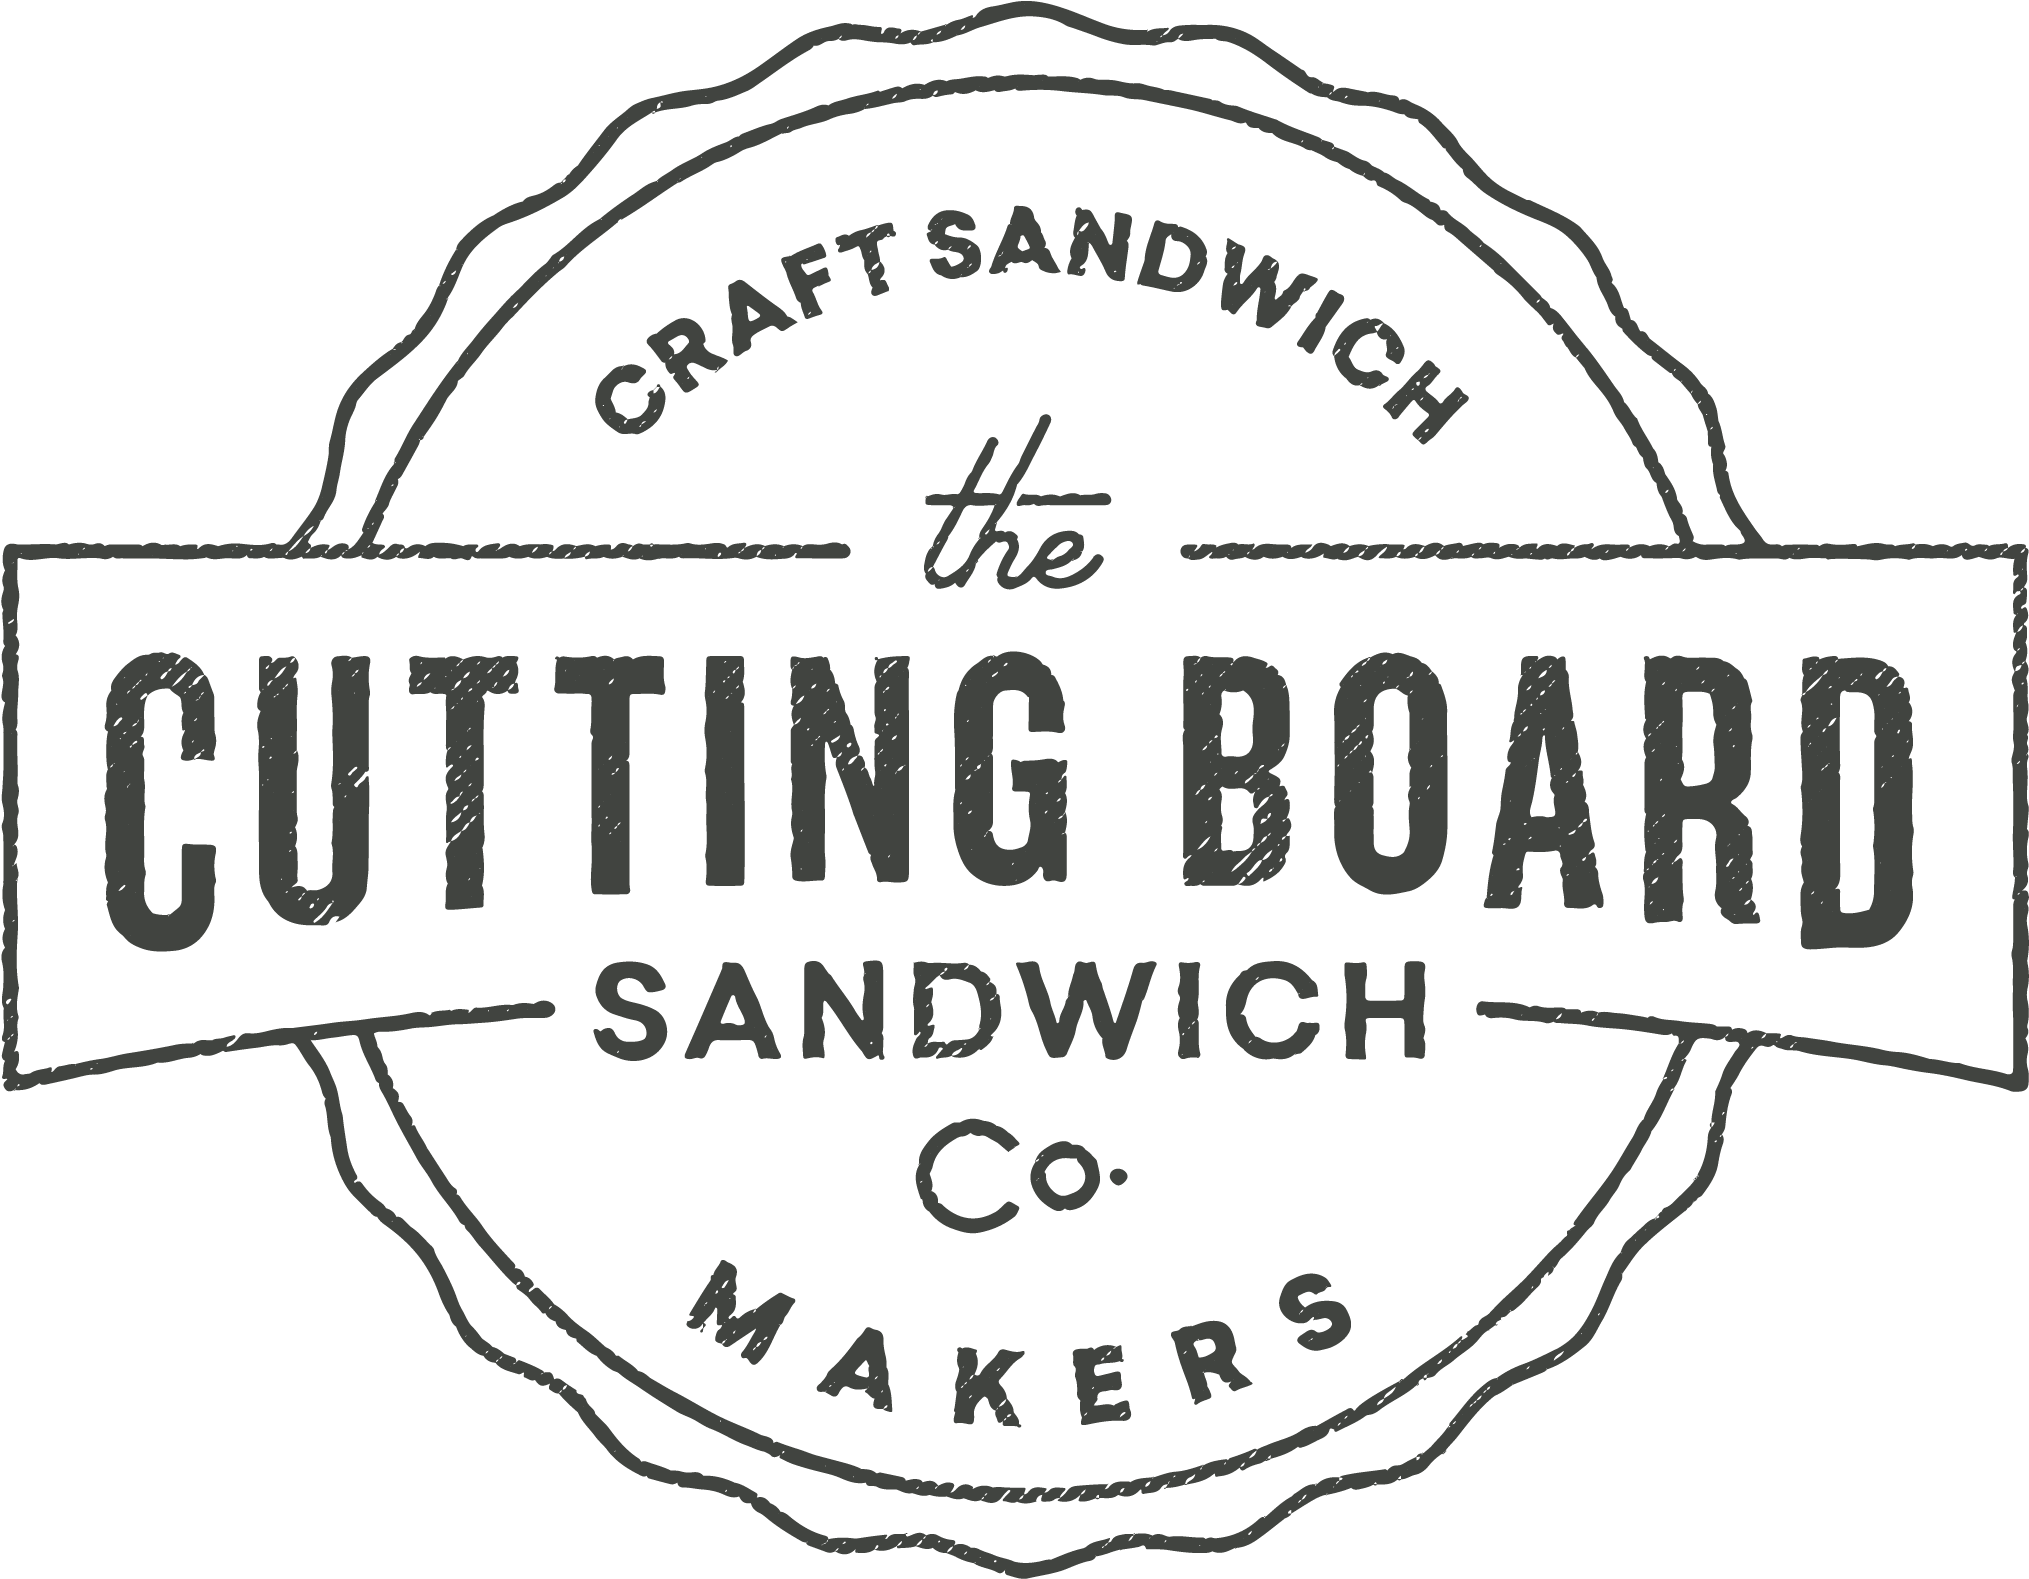 The Cutting Board Sandwich Company - Sign (2160x1728), Png Download